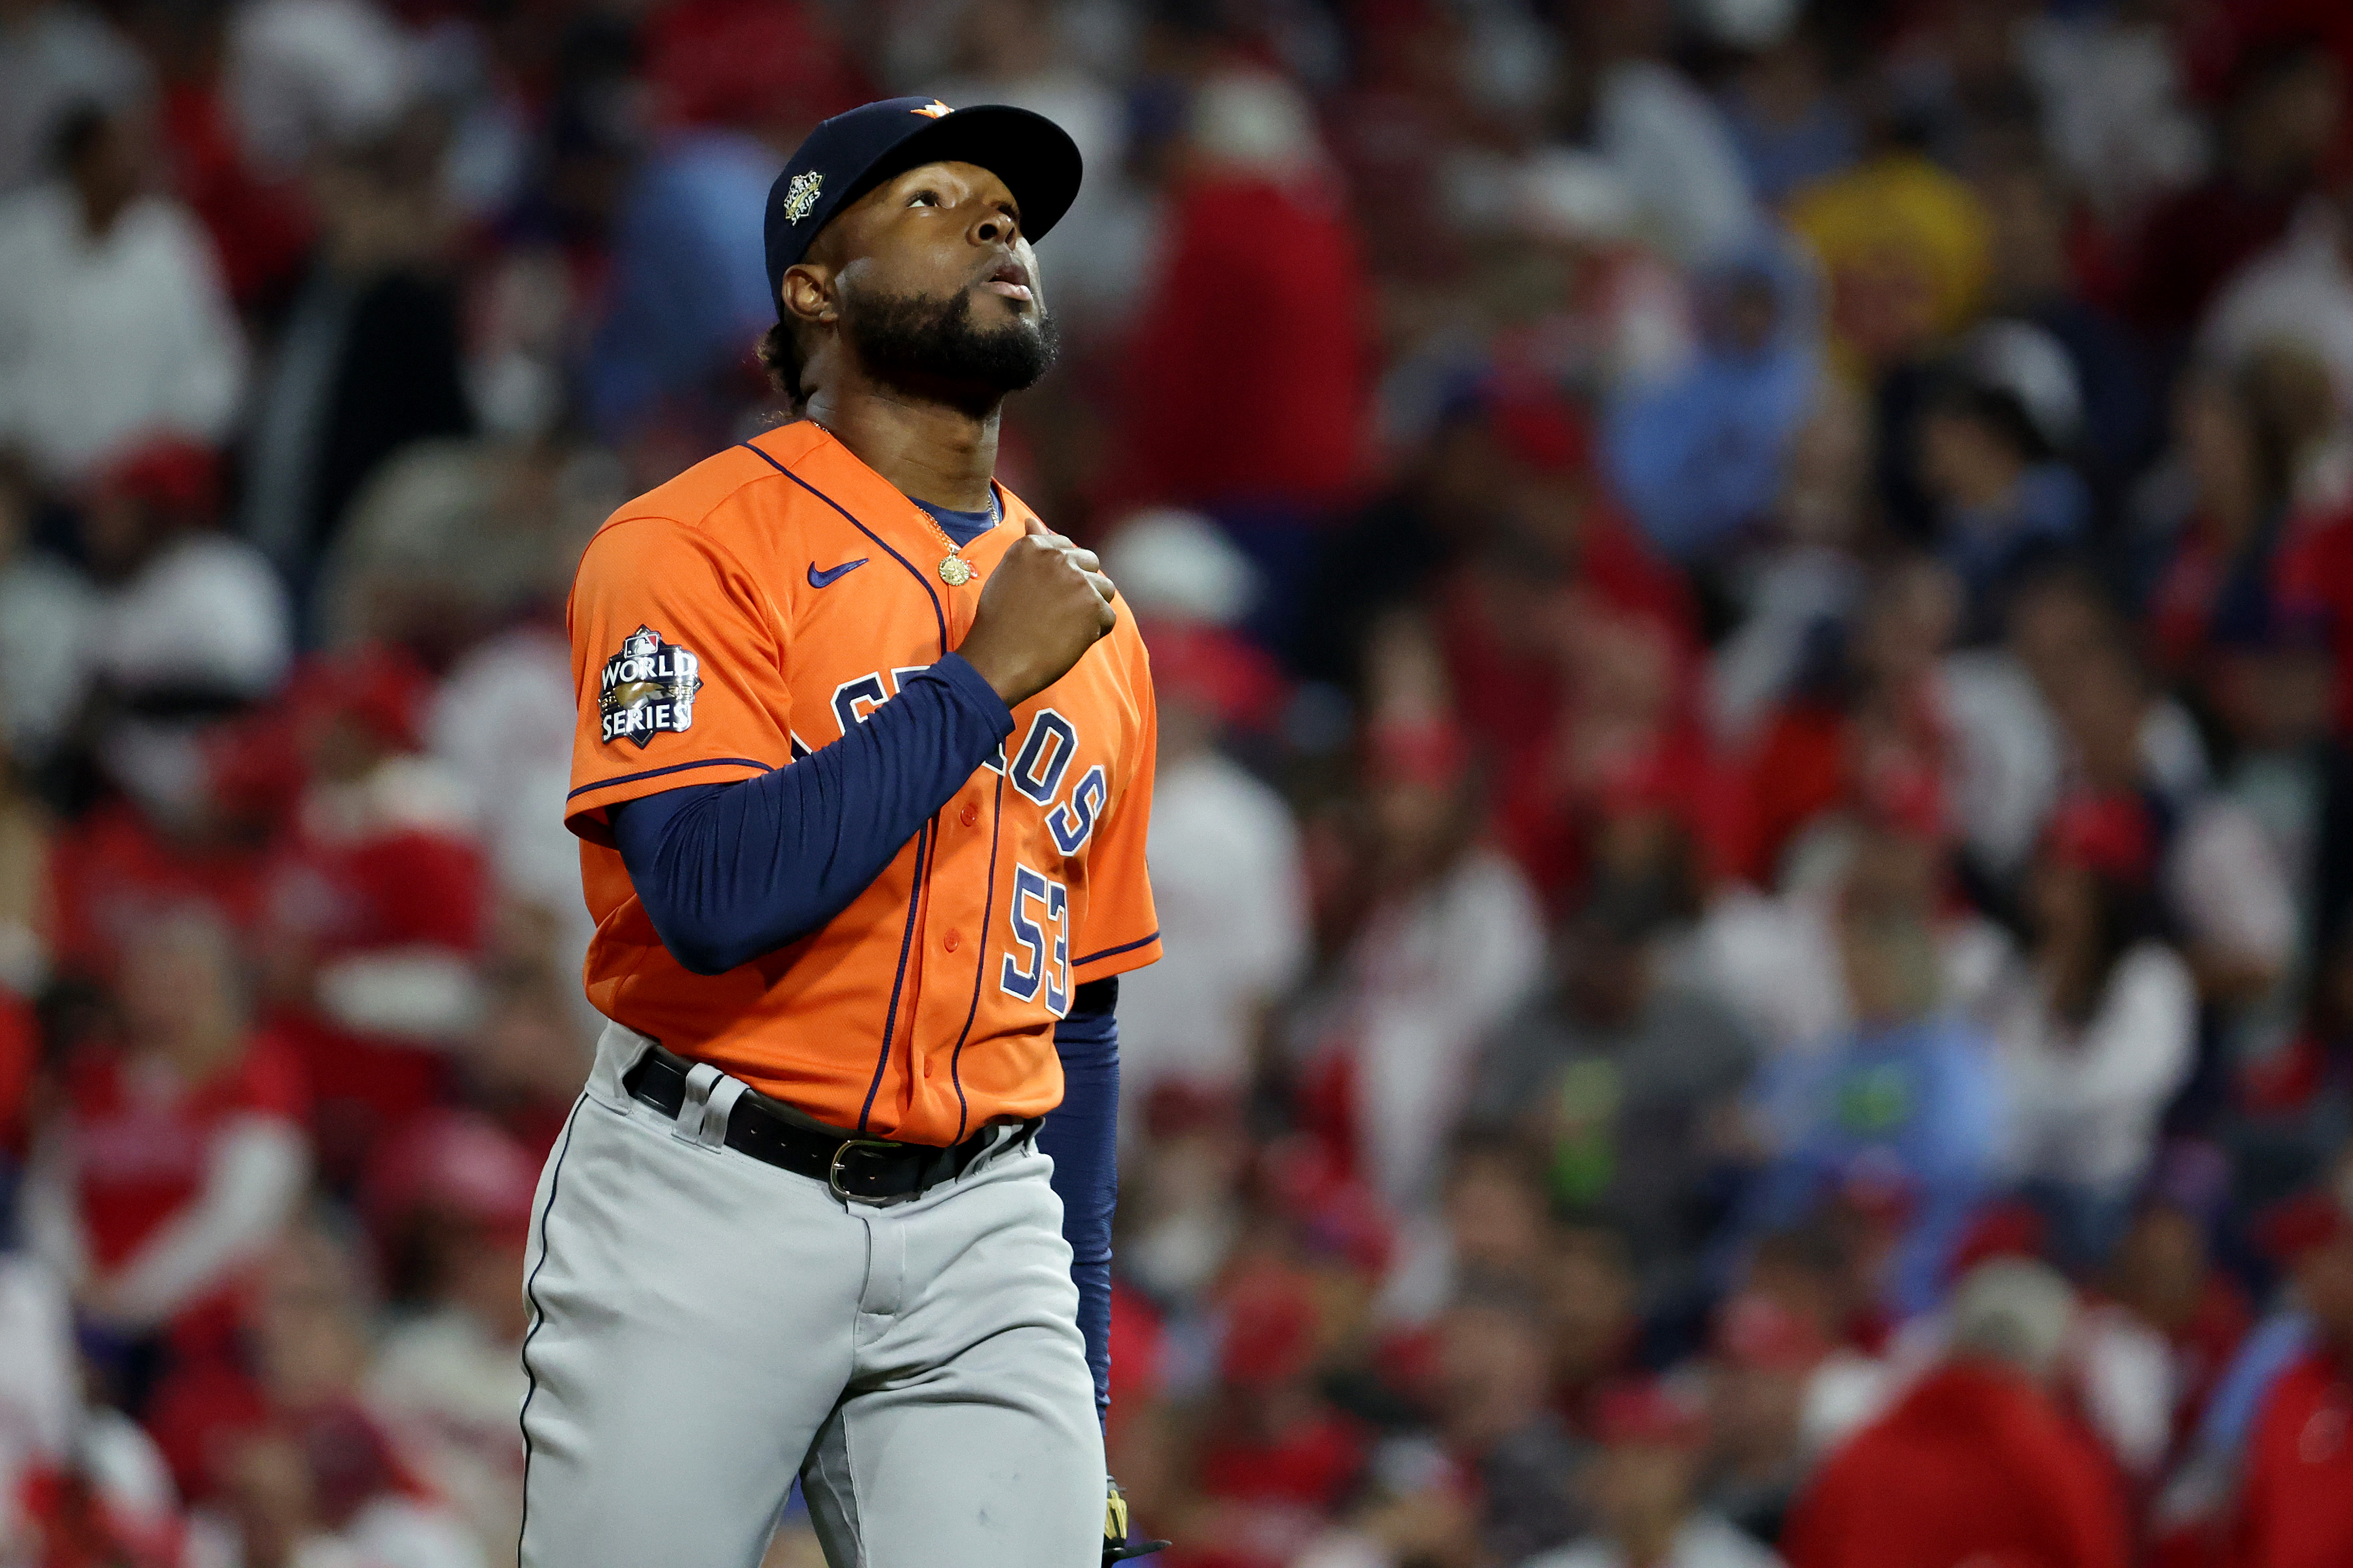 Cristian Javier of the Houston Astros reacts after the end of the fifth inning against the Philadelphia Phillies in Game Four of the 2022 World Series at Citizens Bank Park on November 02, 2022 in Philadelphia, Pennsylvania.